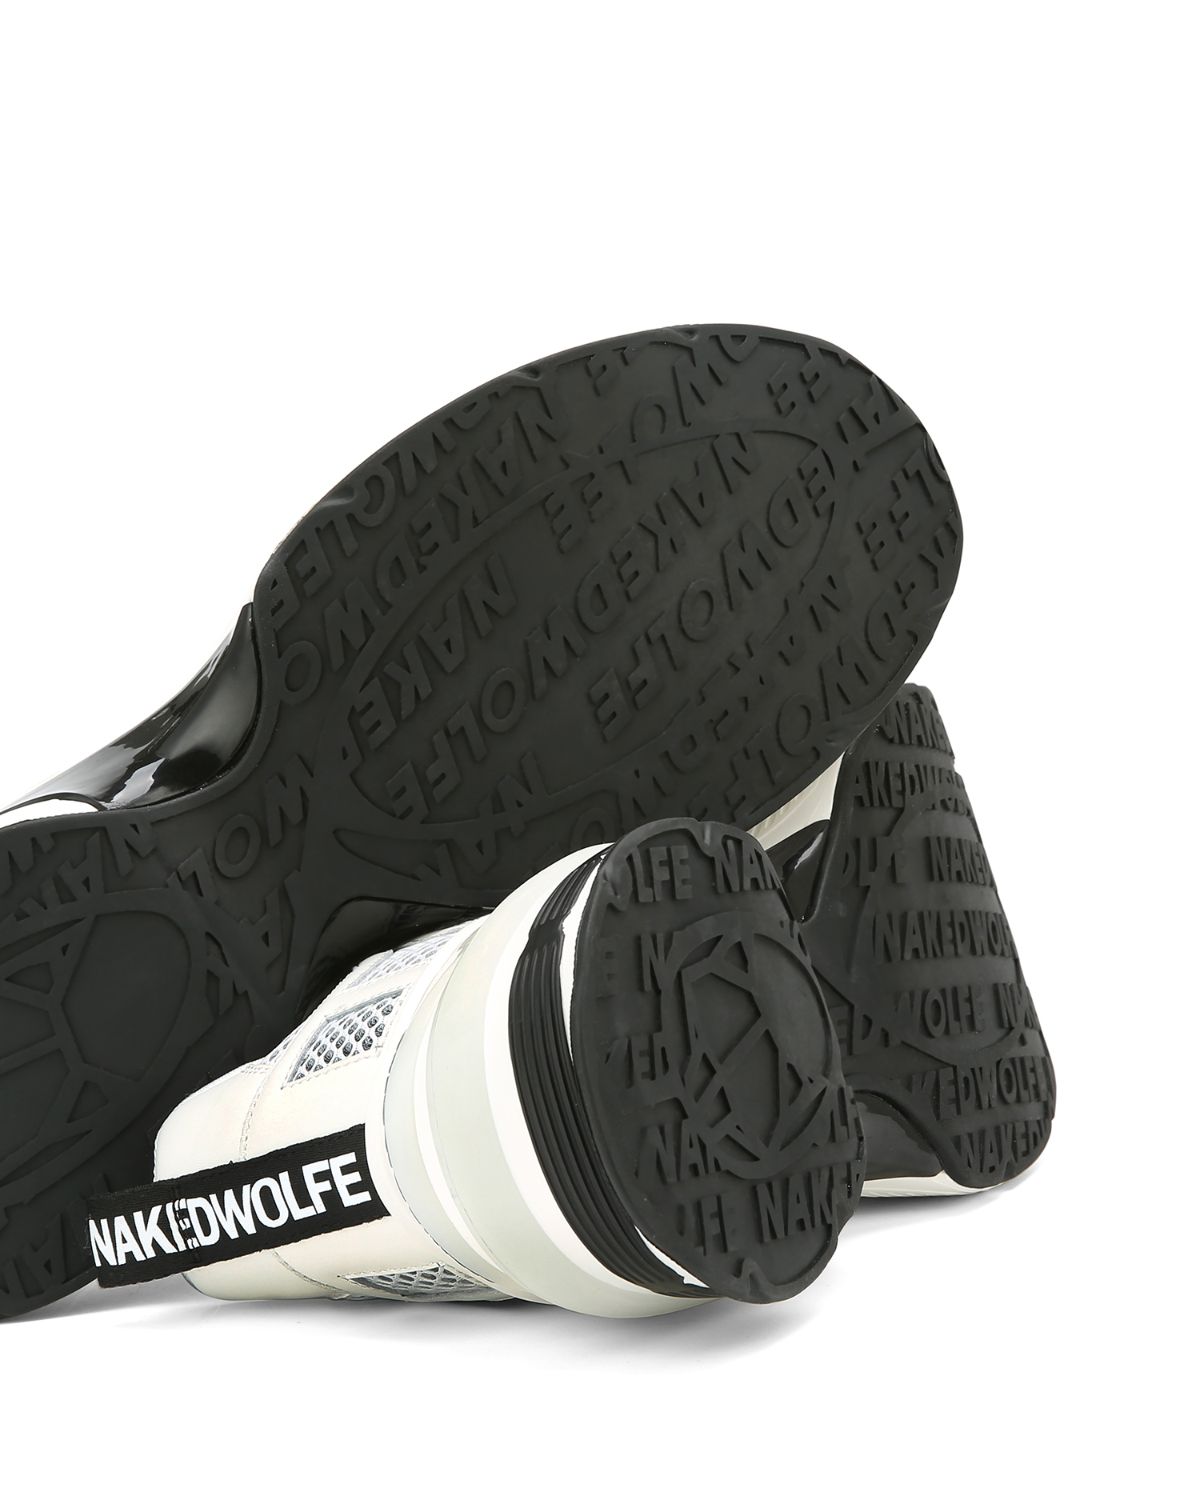 Naked Wolfe Teases Sporty new Sneakers – PAUSE Online | Men's Fashion ...